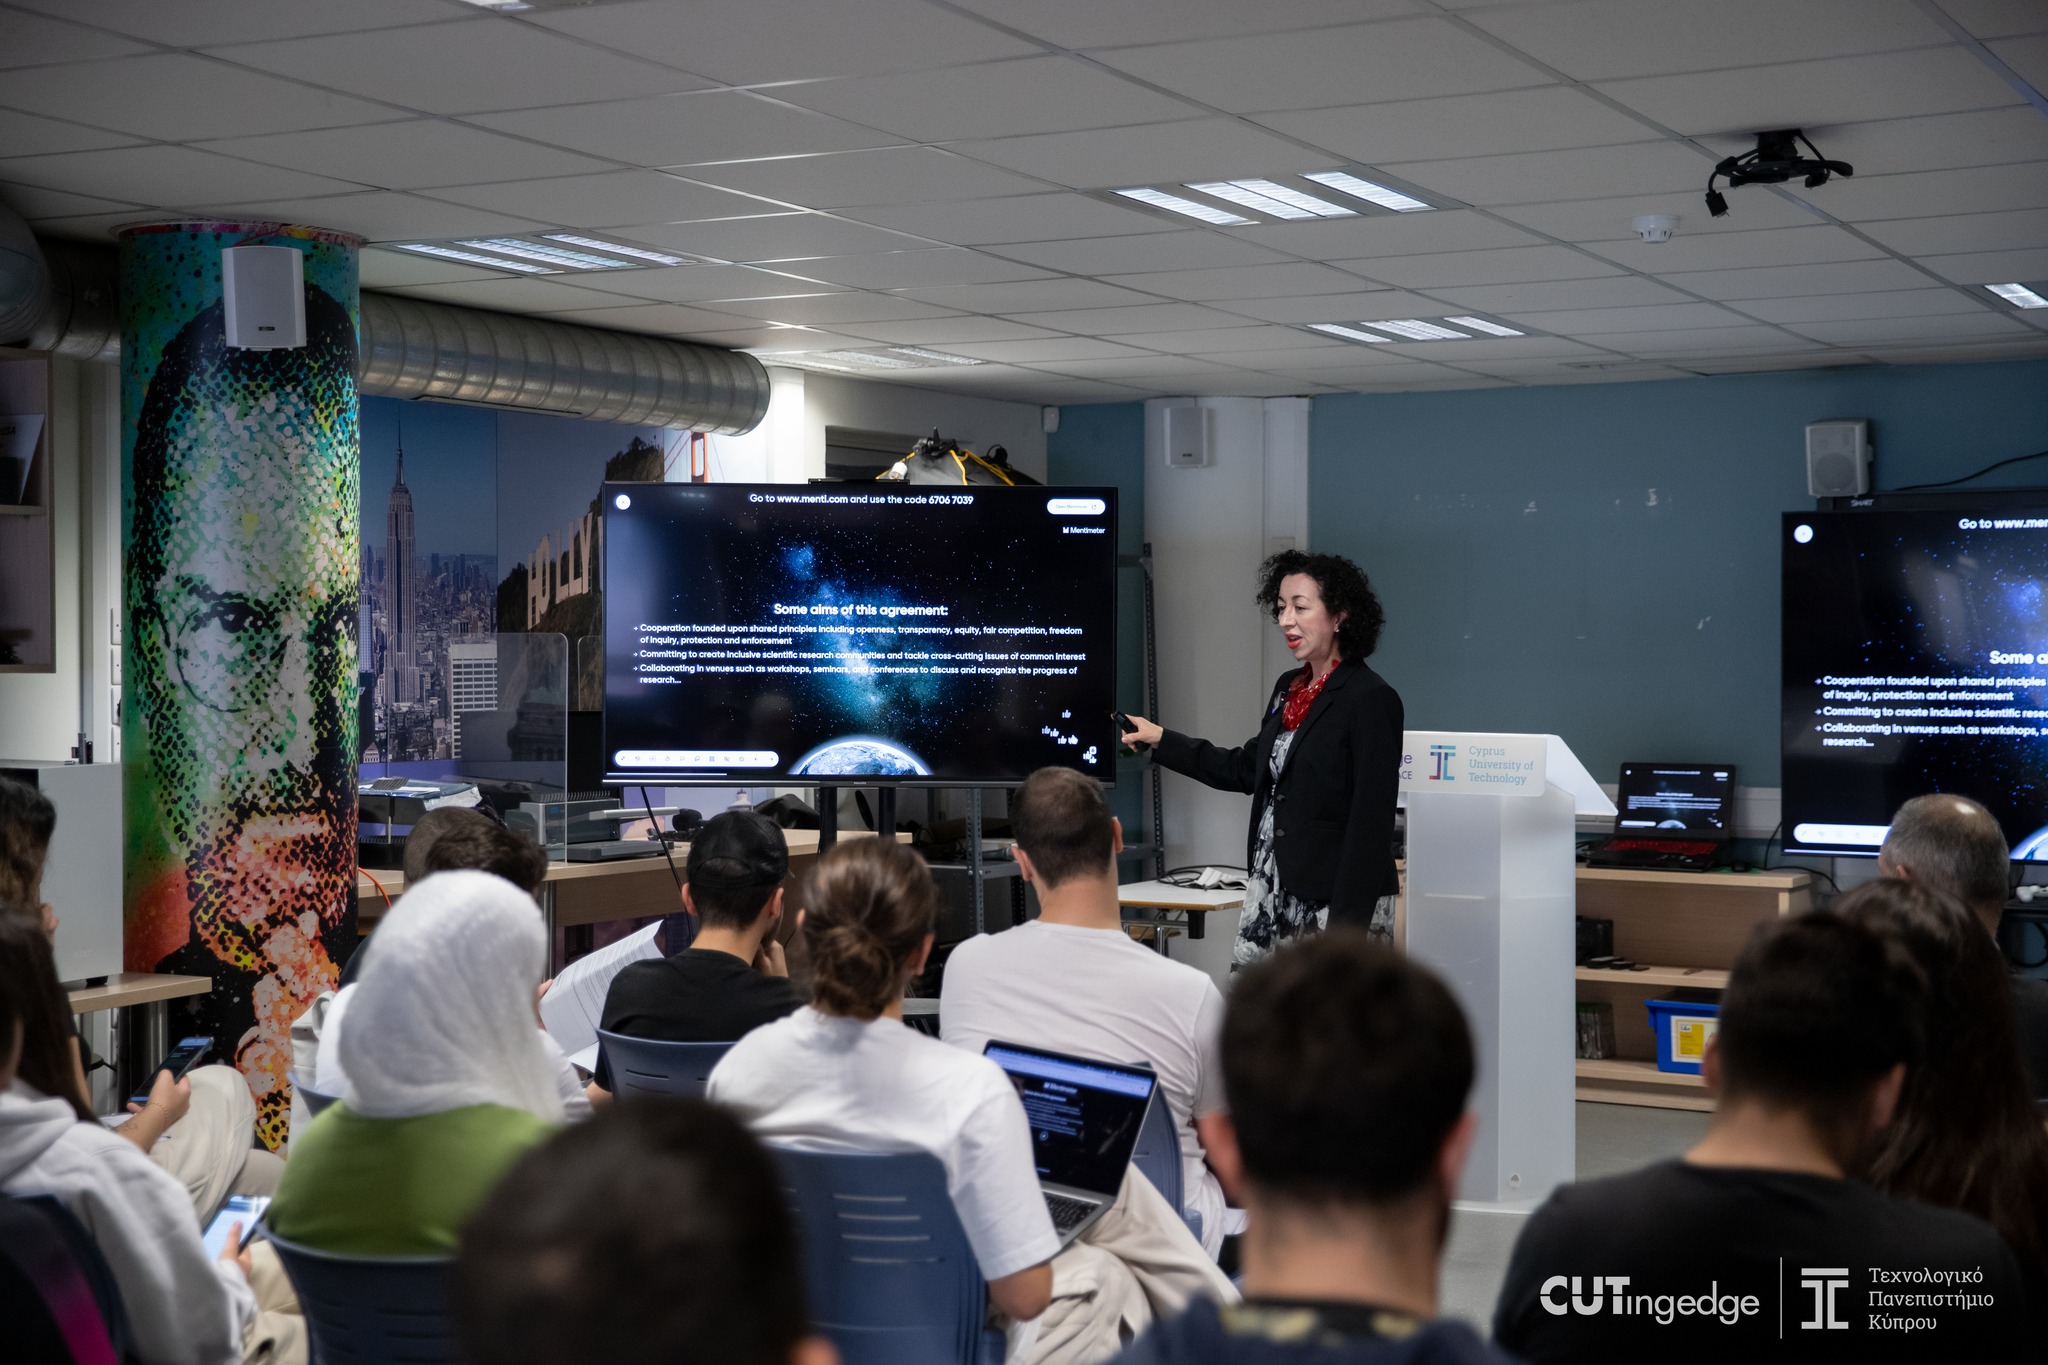 The public affairs officer of the U.S. Embassy Nicosia ,presentating “Diplomacy and Technology” at CUTing Edge